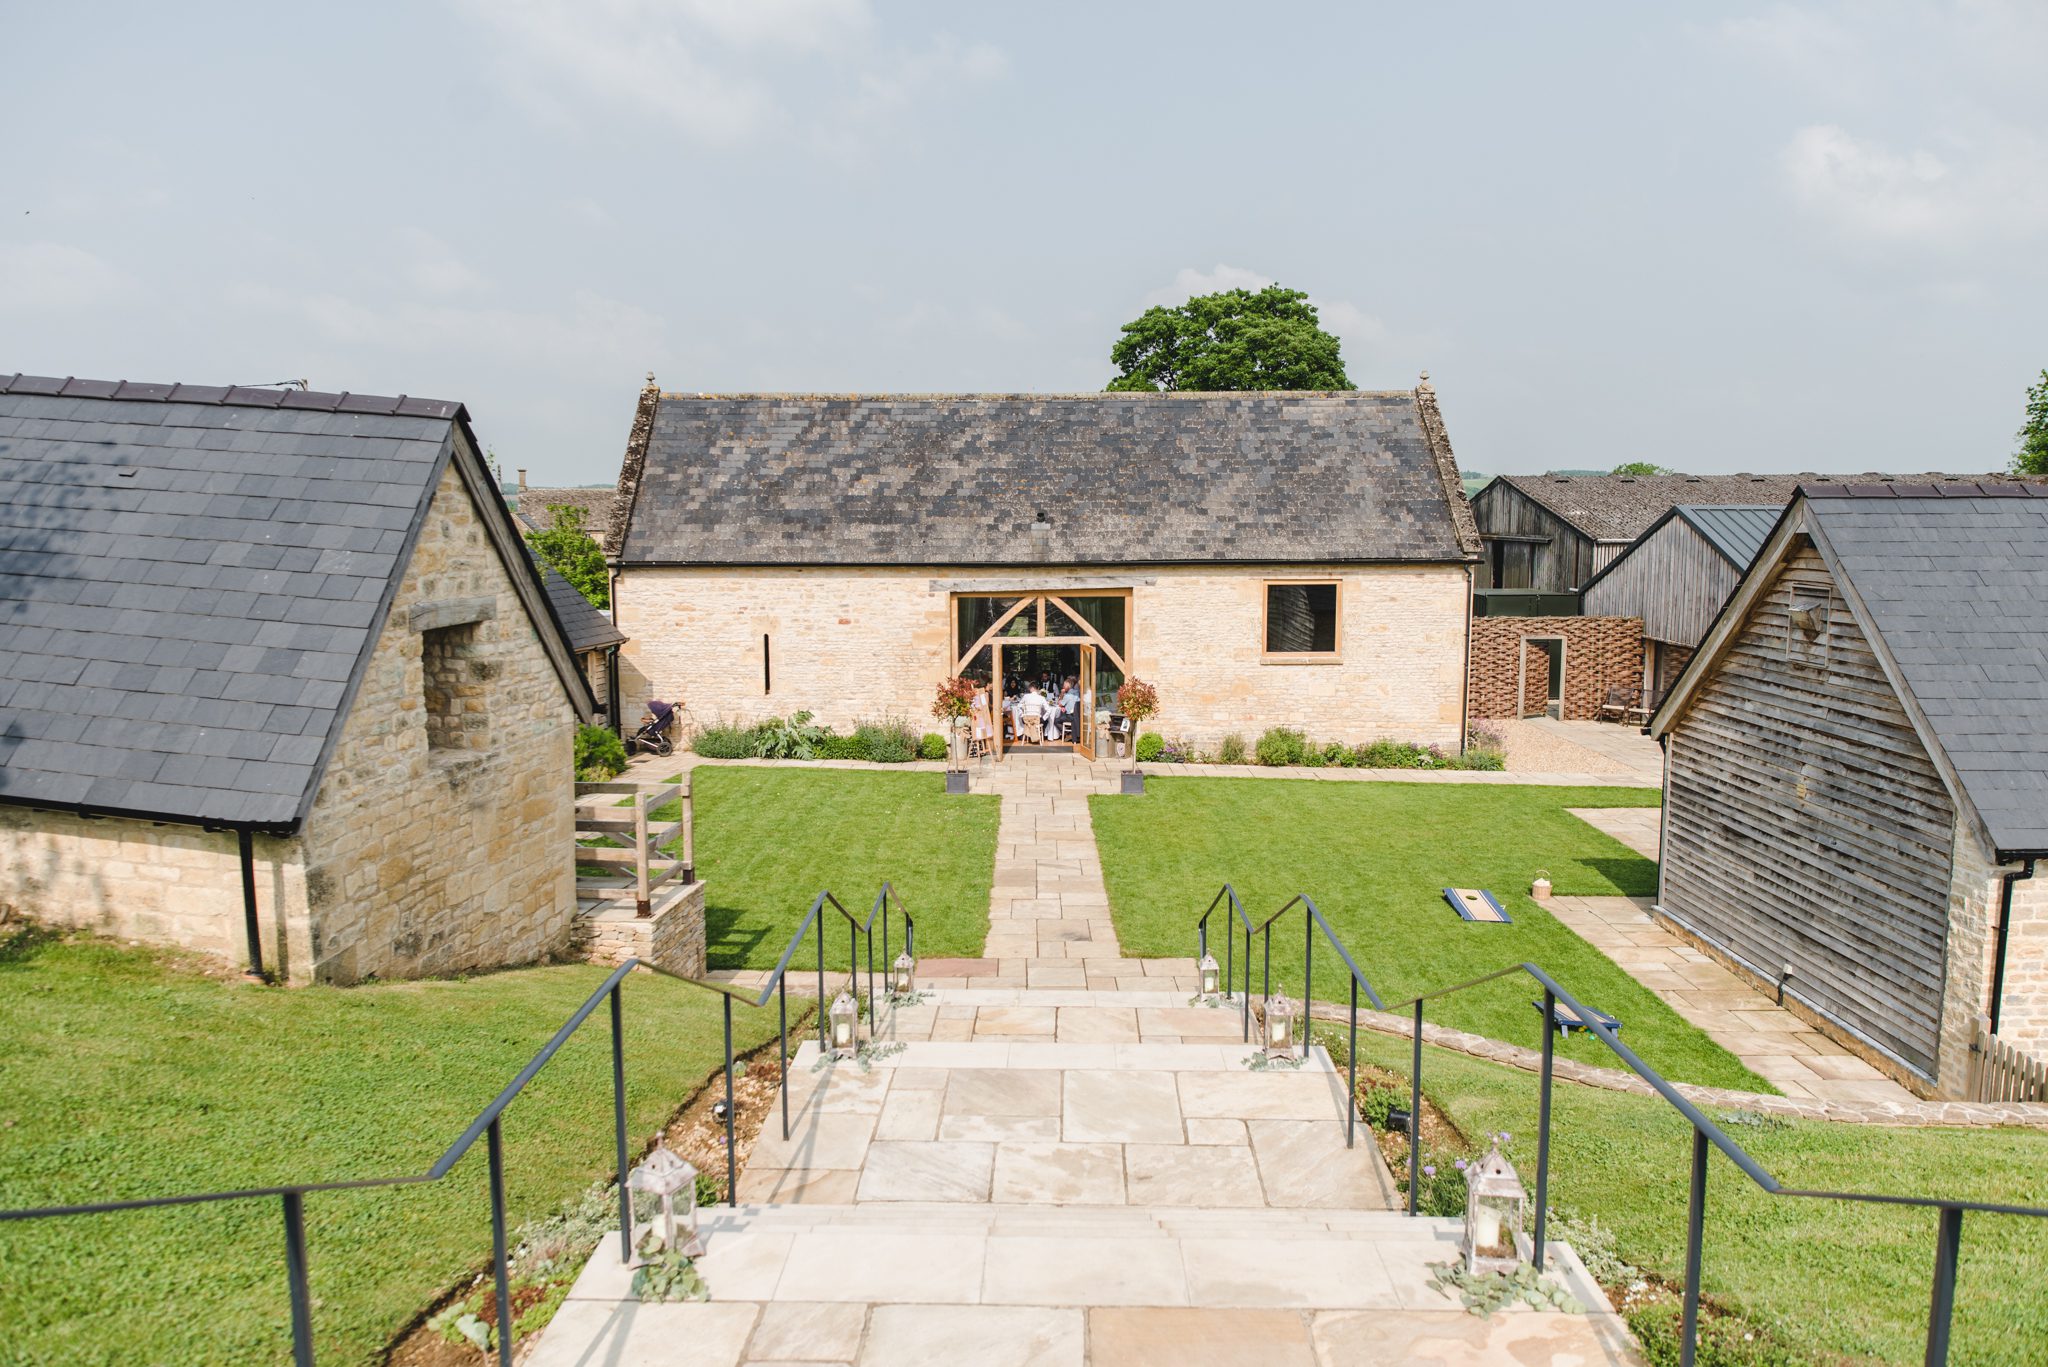 Wide view of the barn at upcote gloucestershire wedding venue